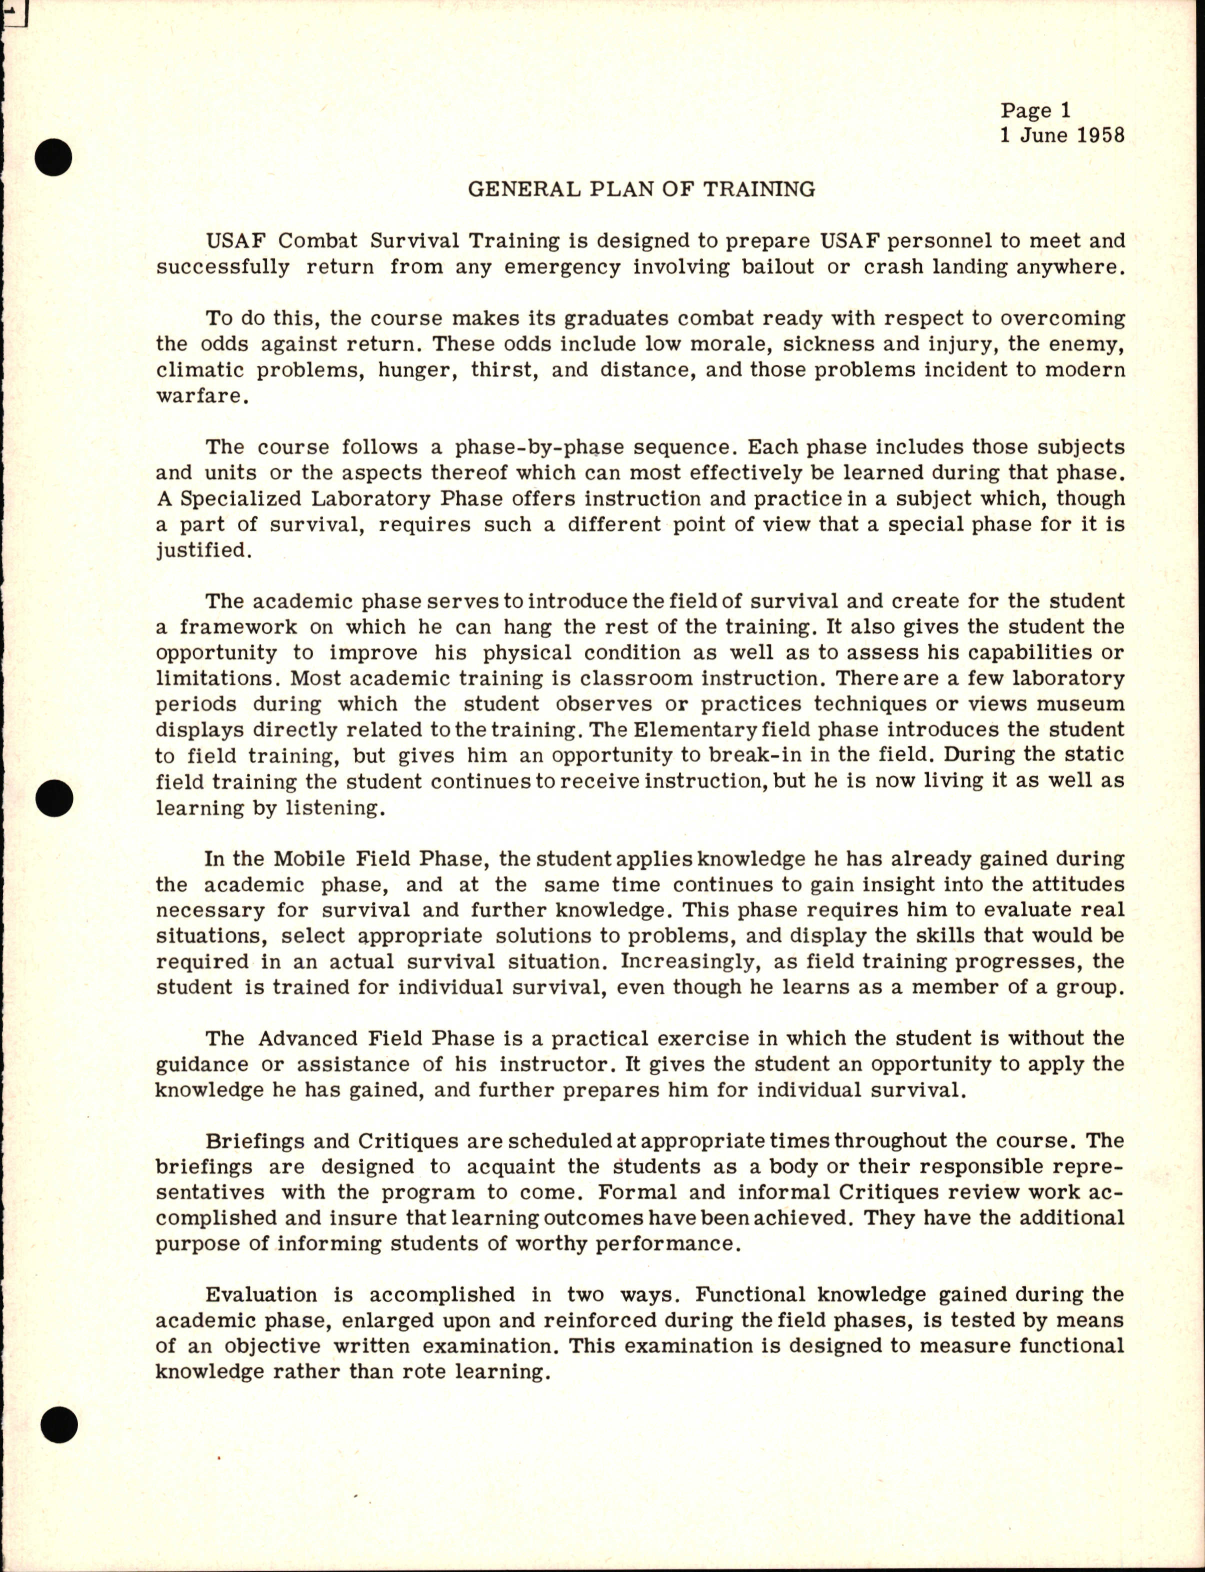 Sample page 7 from AirCorps Library document: Training Manual for USAF Advanced Survival Training, Course No. 140000